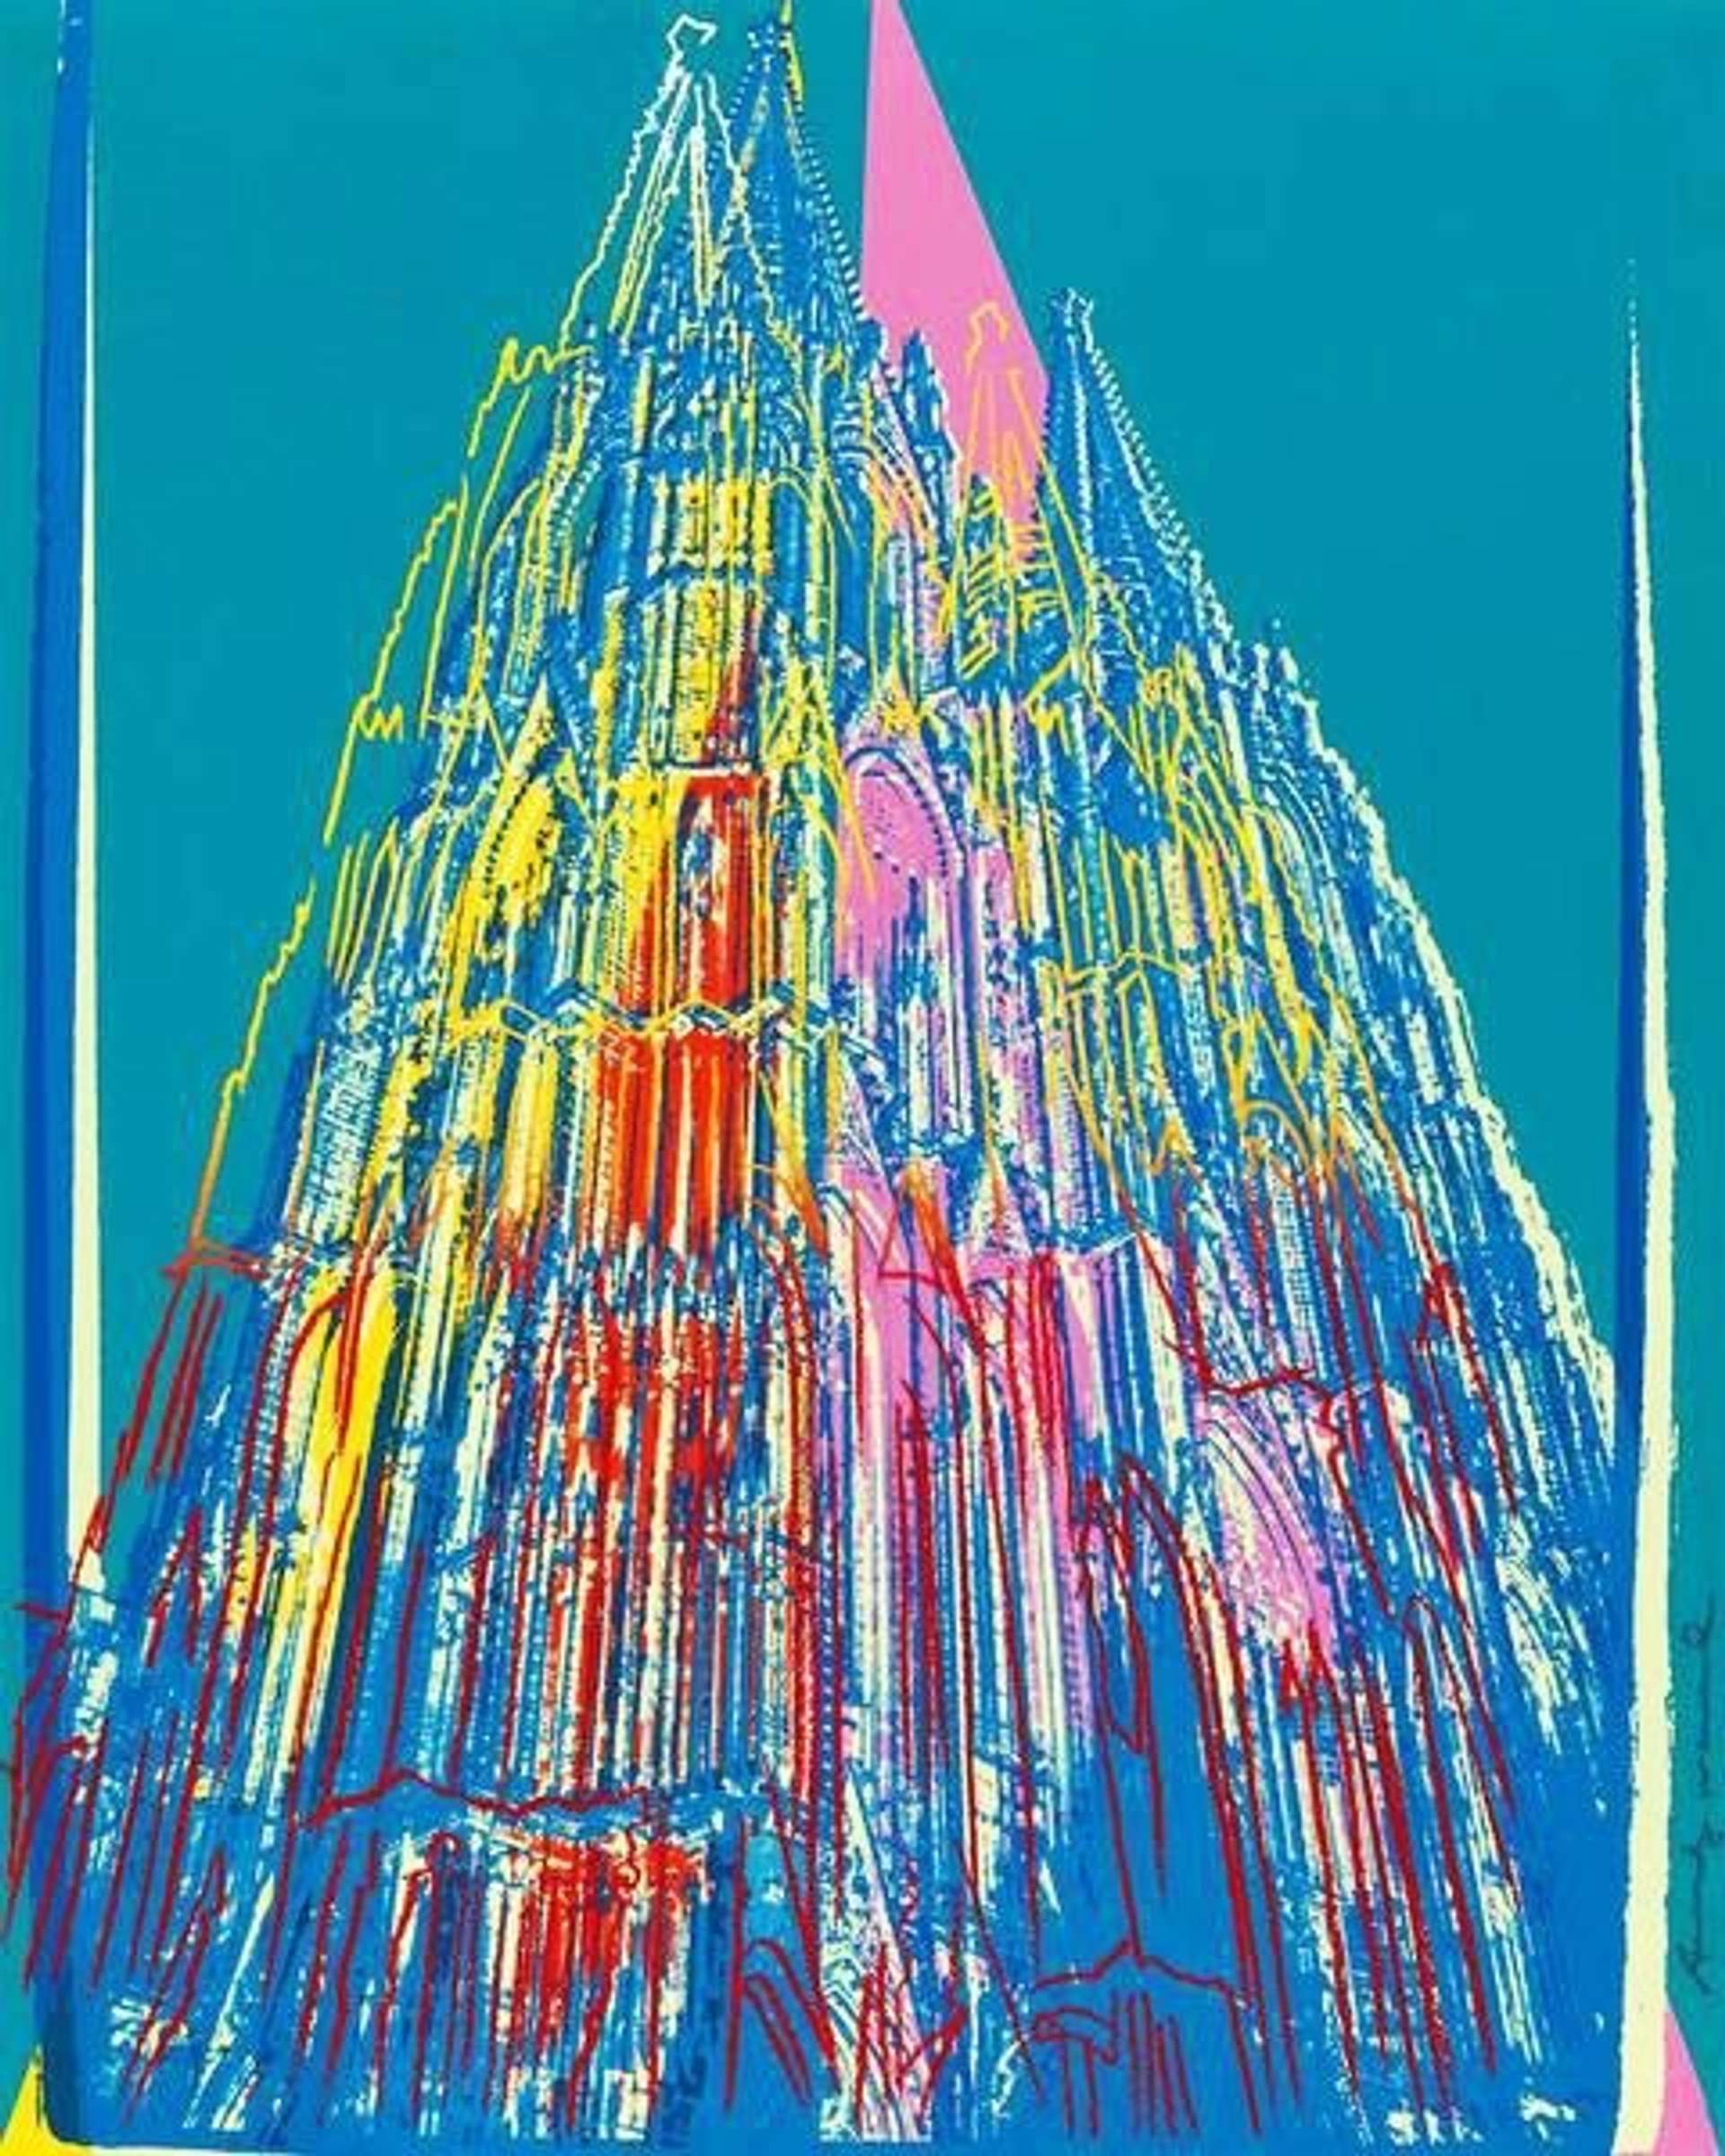 10 Facts About Andy Warhol's Cologne Cathedral